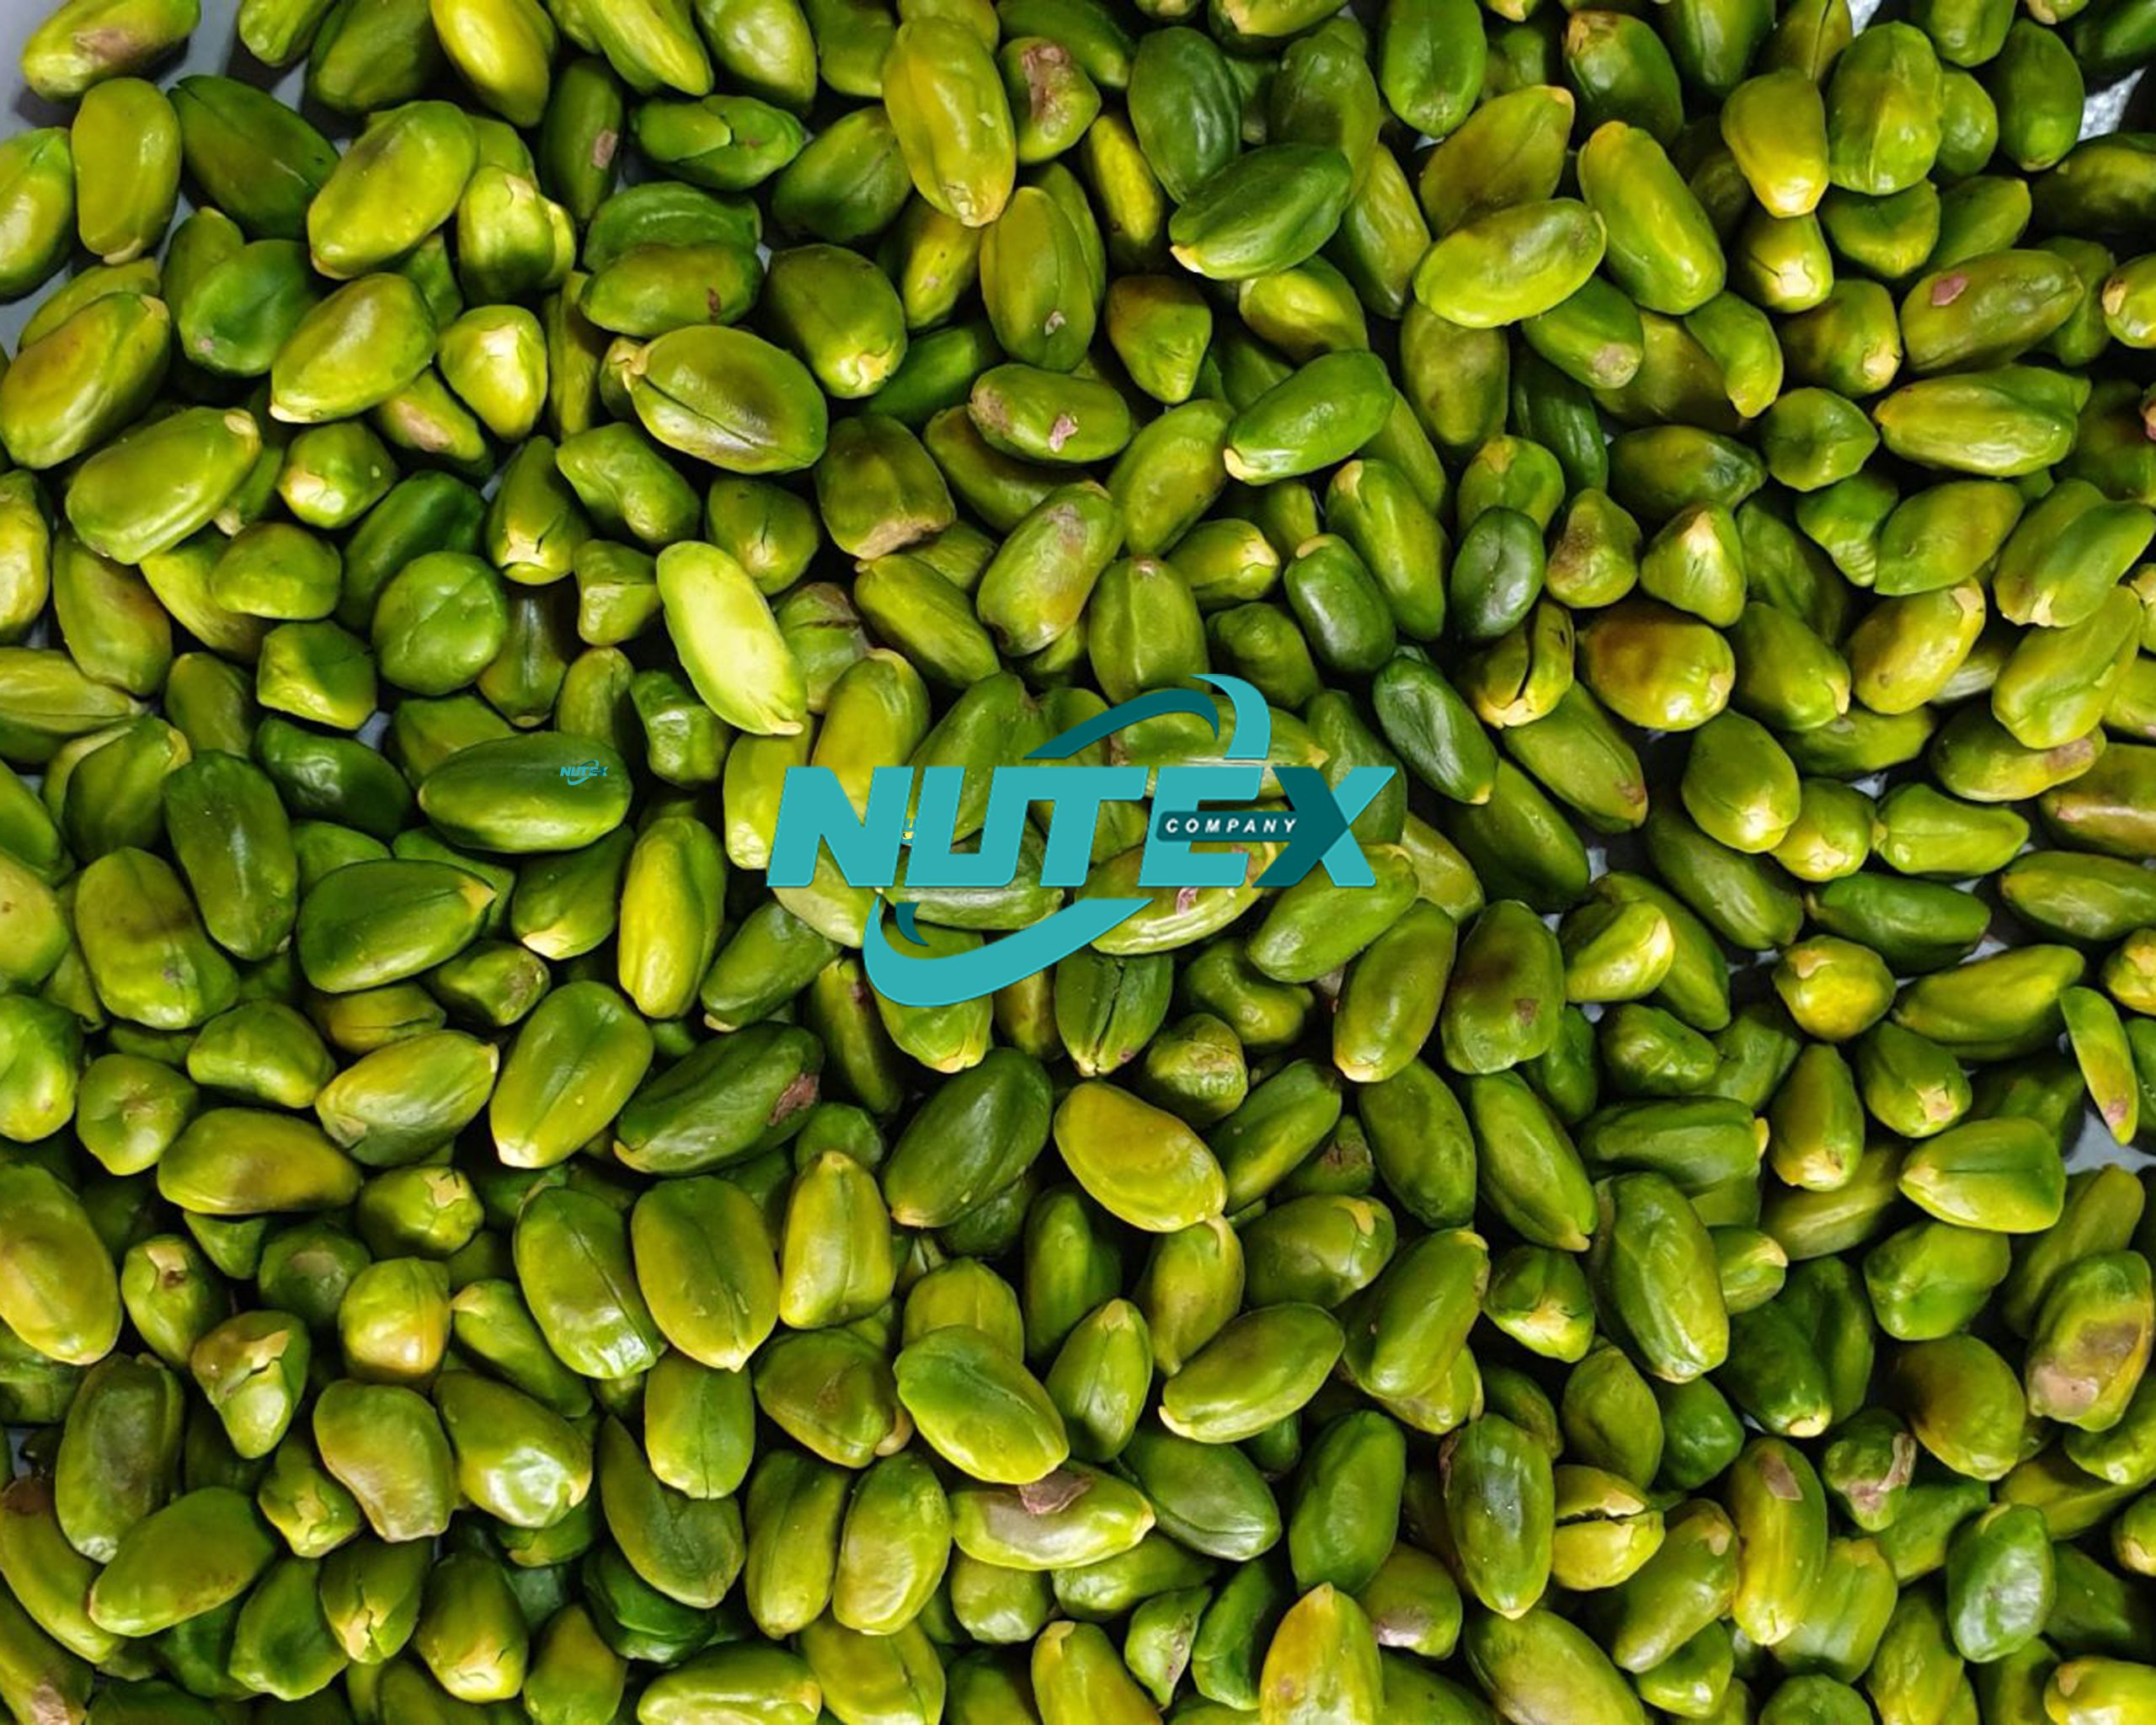 Price of quality pistachio kernels_ Manufacturer of Iranian Pistachio Kernels - Raw, Roasted and Salted_ Nutex Company